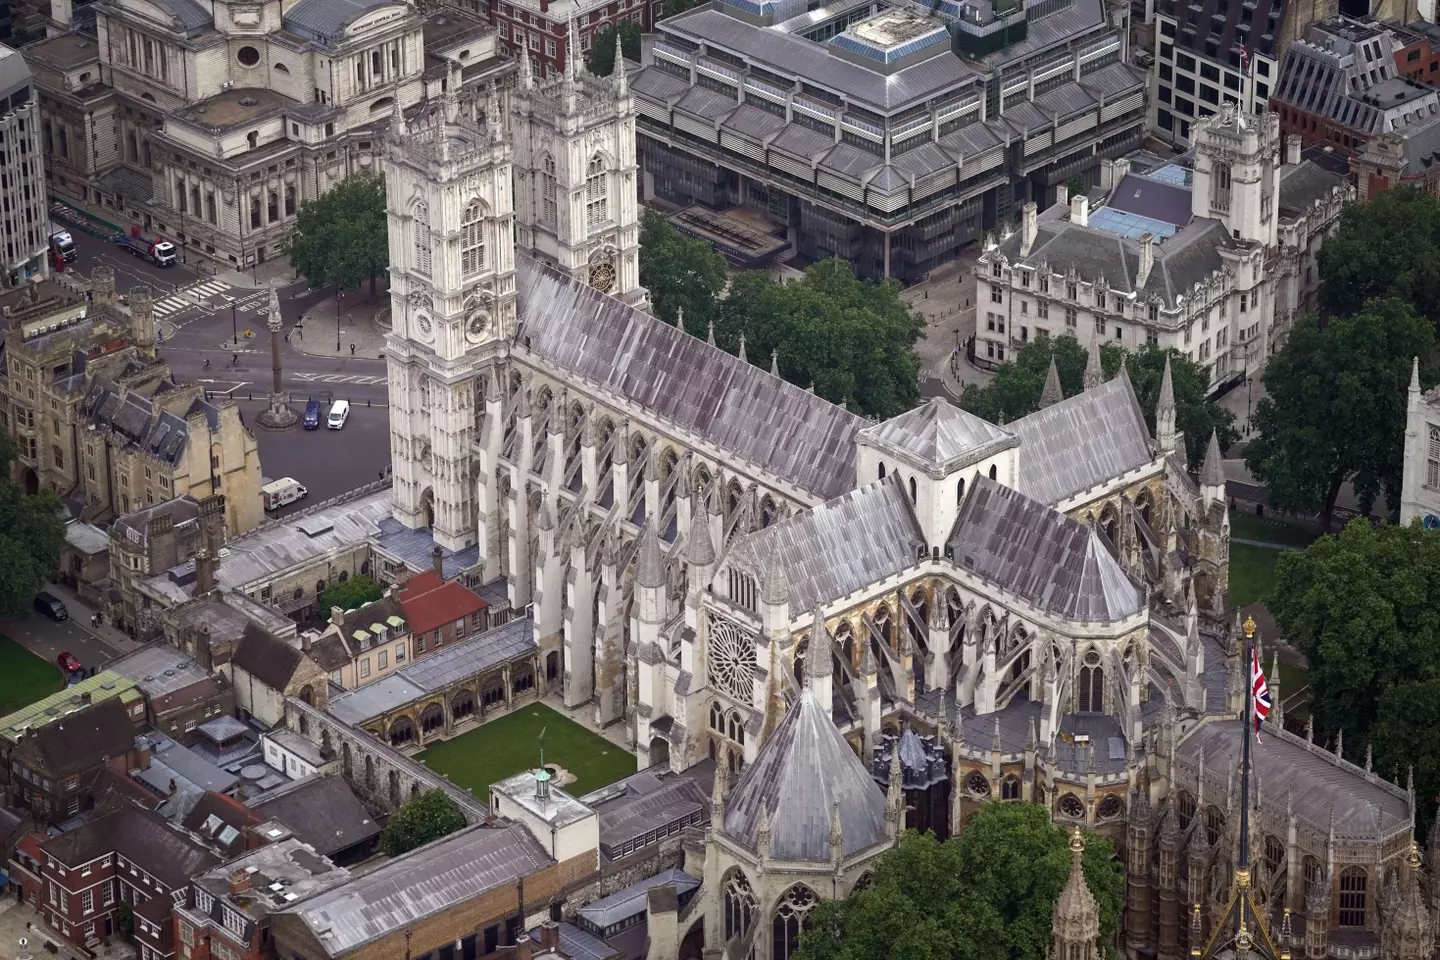 The service will take place at Westminster Abbey.